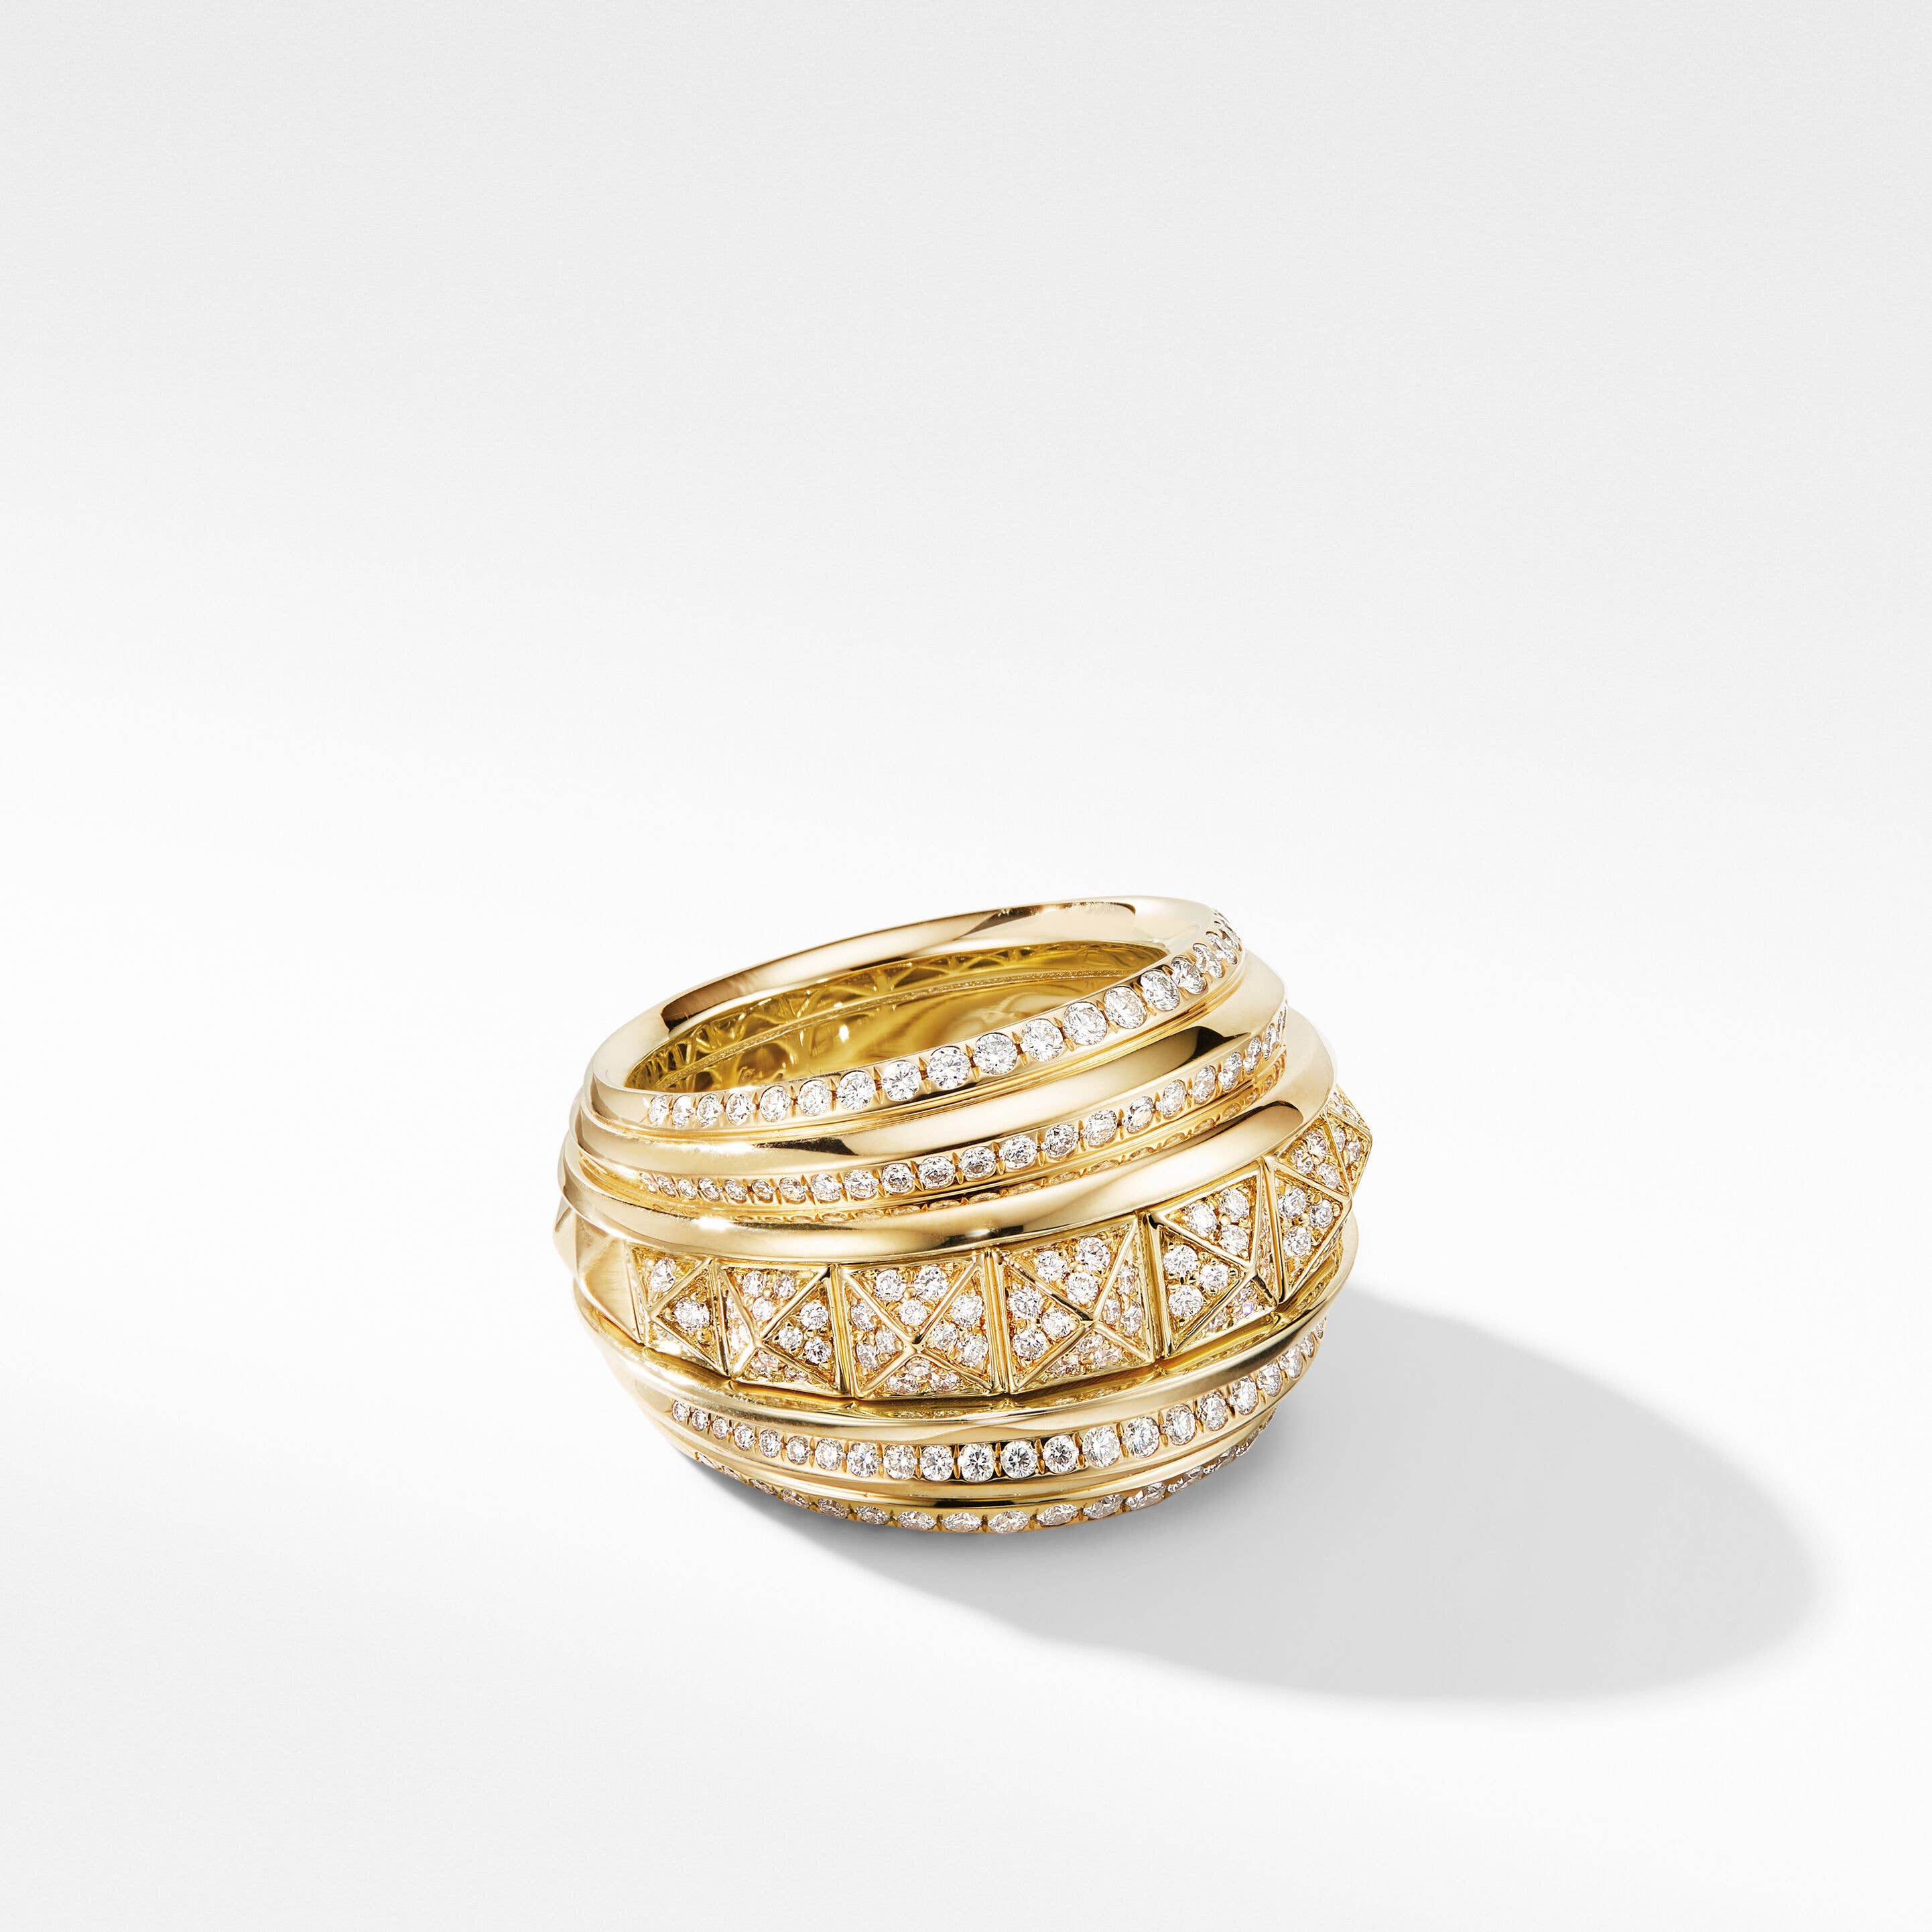 Modern Renaissance Pyramid Ring in 18K Yellow Gold with Full Pavé Diamonds